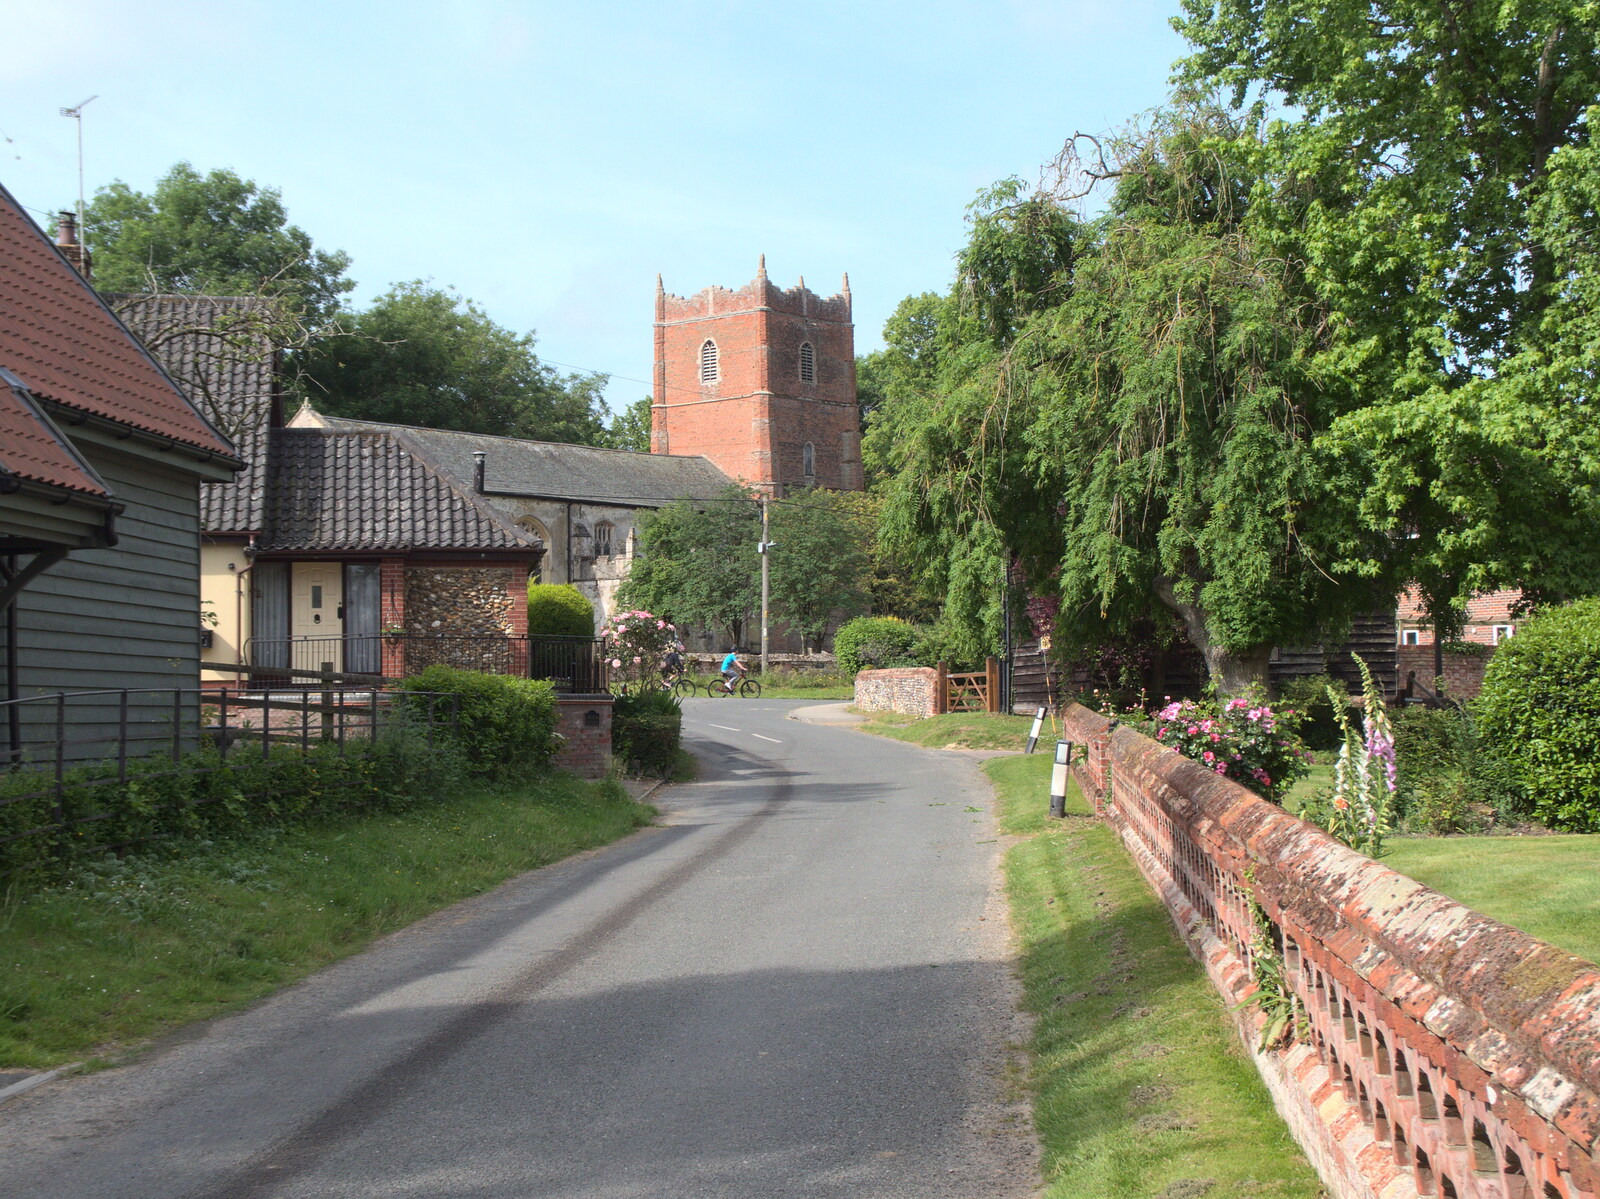 The church at Gislingham from A BSCC Ride to Pulham Market, Norfolk - 17th June 2021